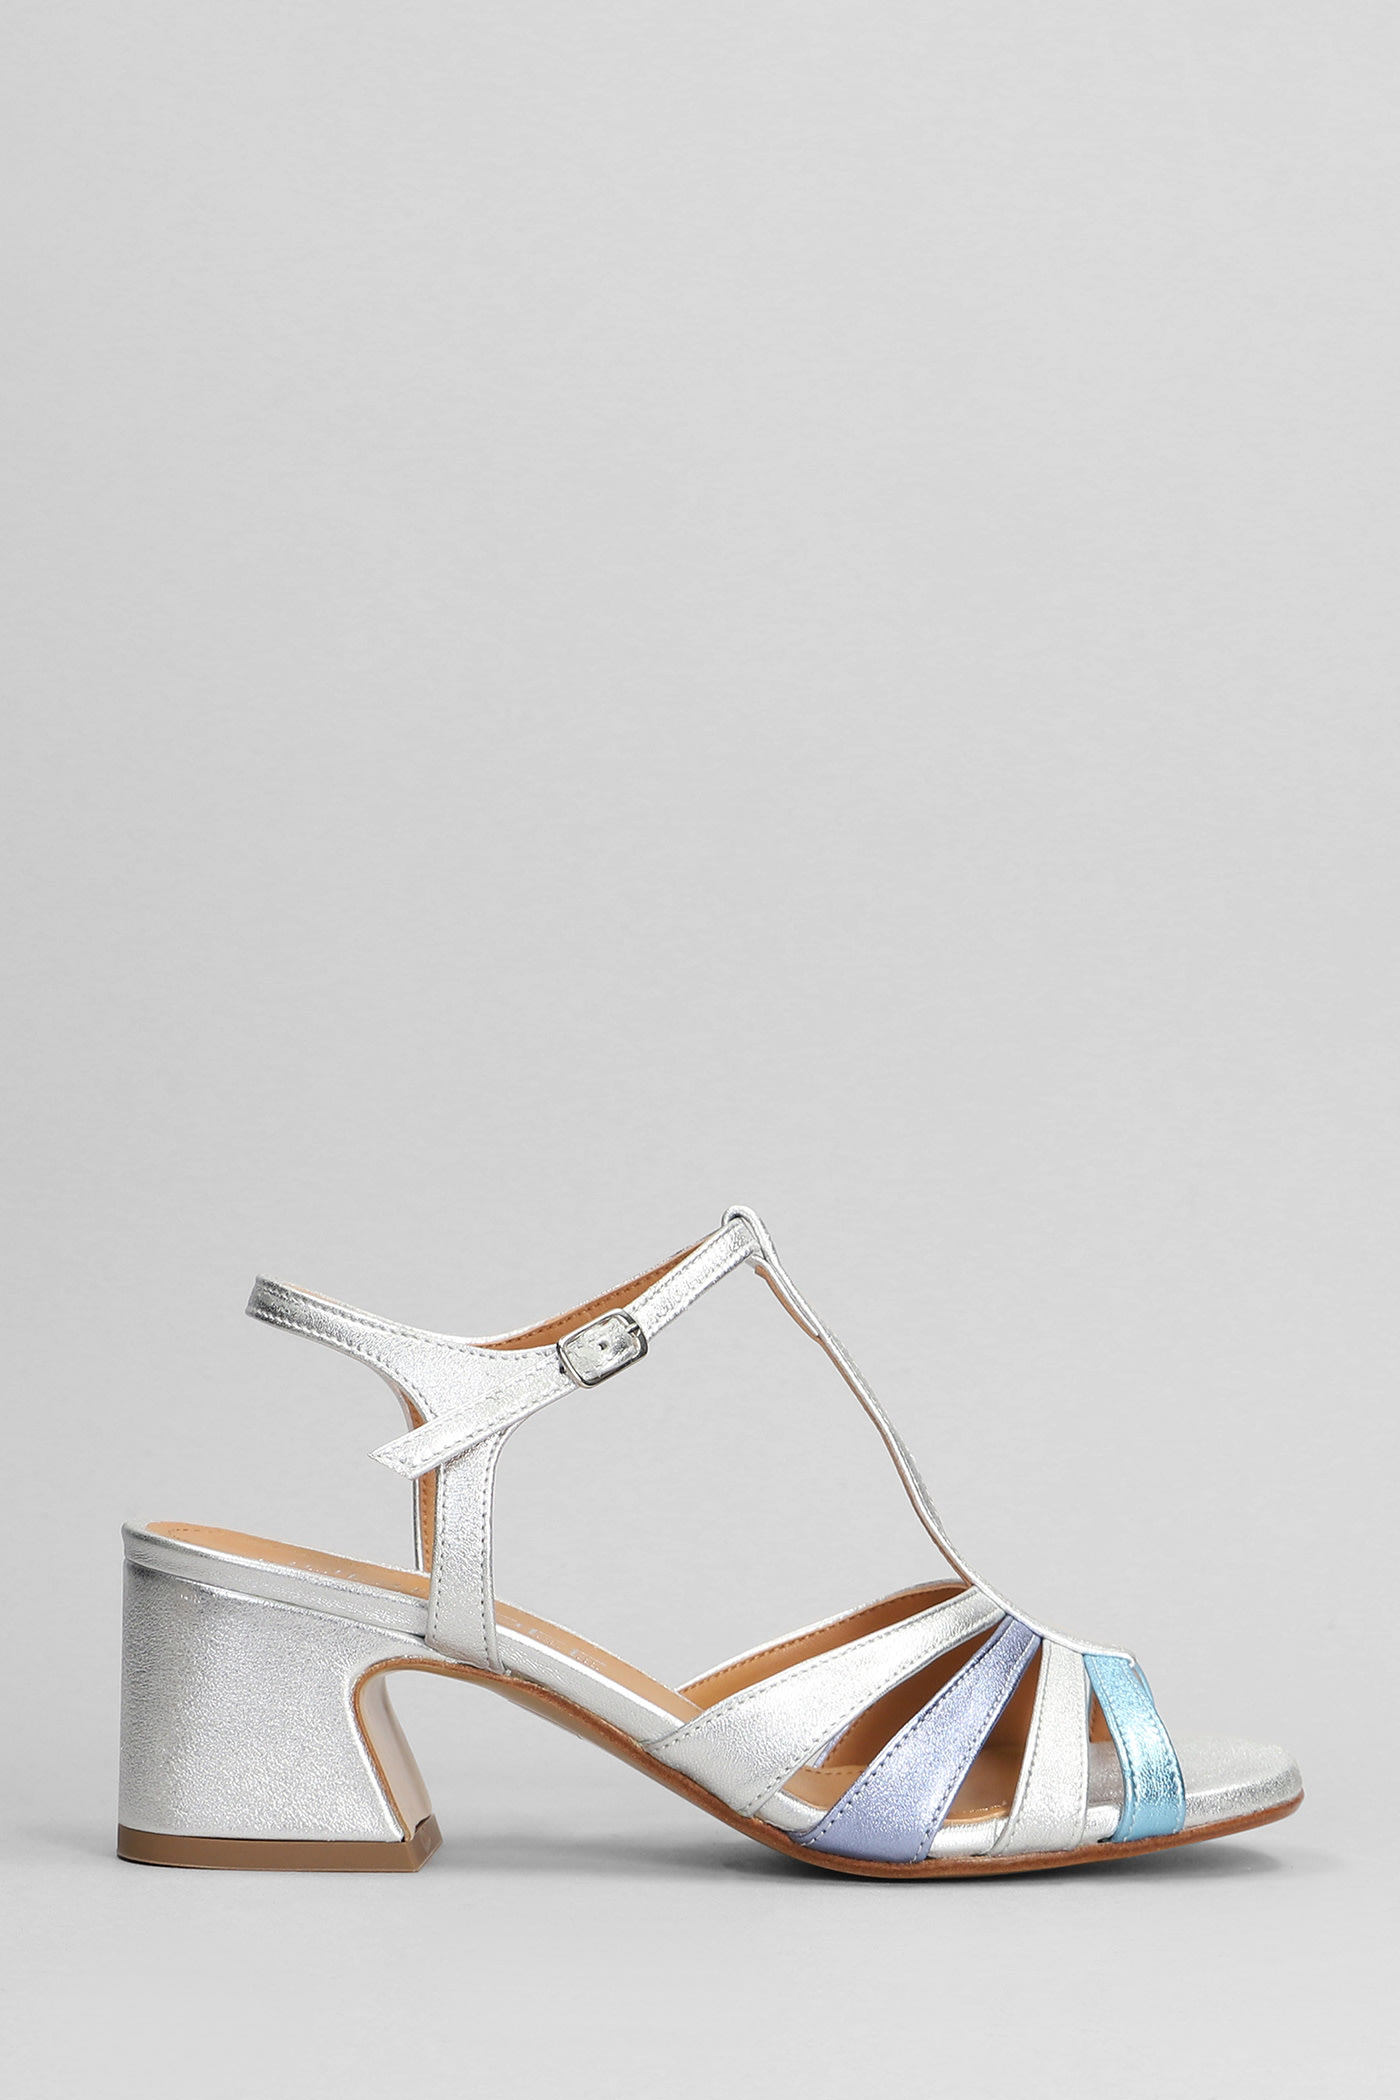 Julie Dee Sandals In Silver Leather